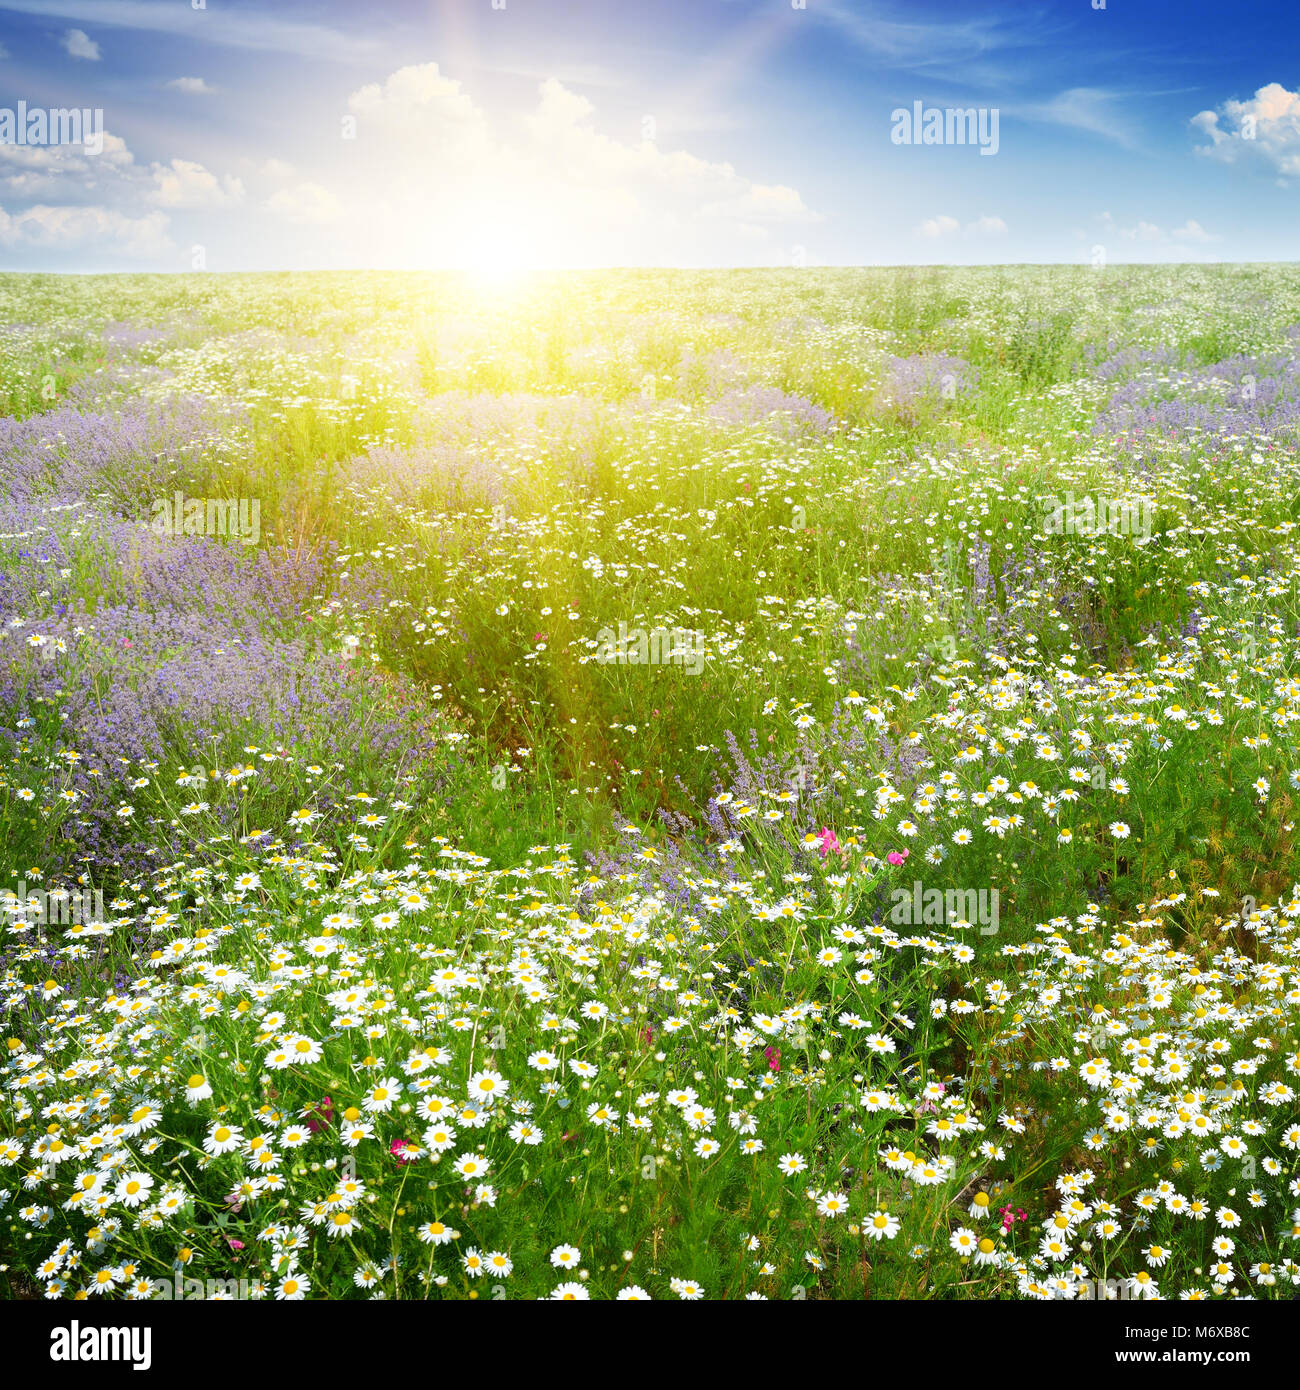 Dawn over scenic summer field with chamomile flowers and lavender. Stock Photo